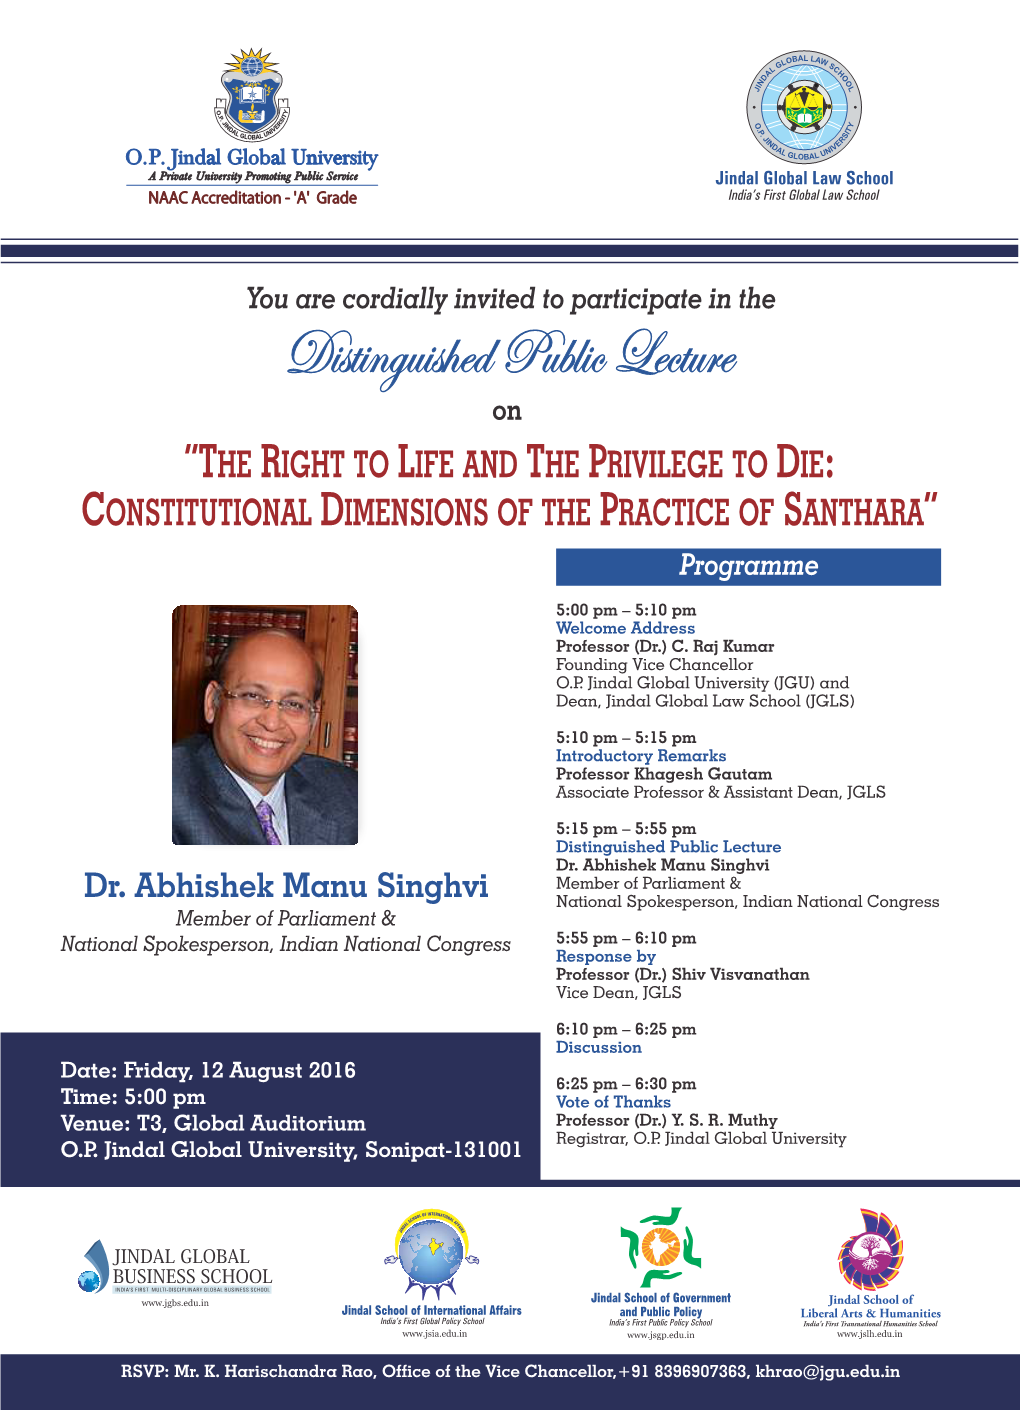 Distinguished Public Lecture by Dr Abhishek Singhvi on 12 August 2016